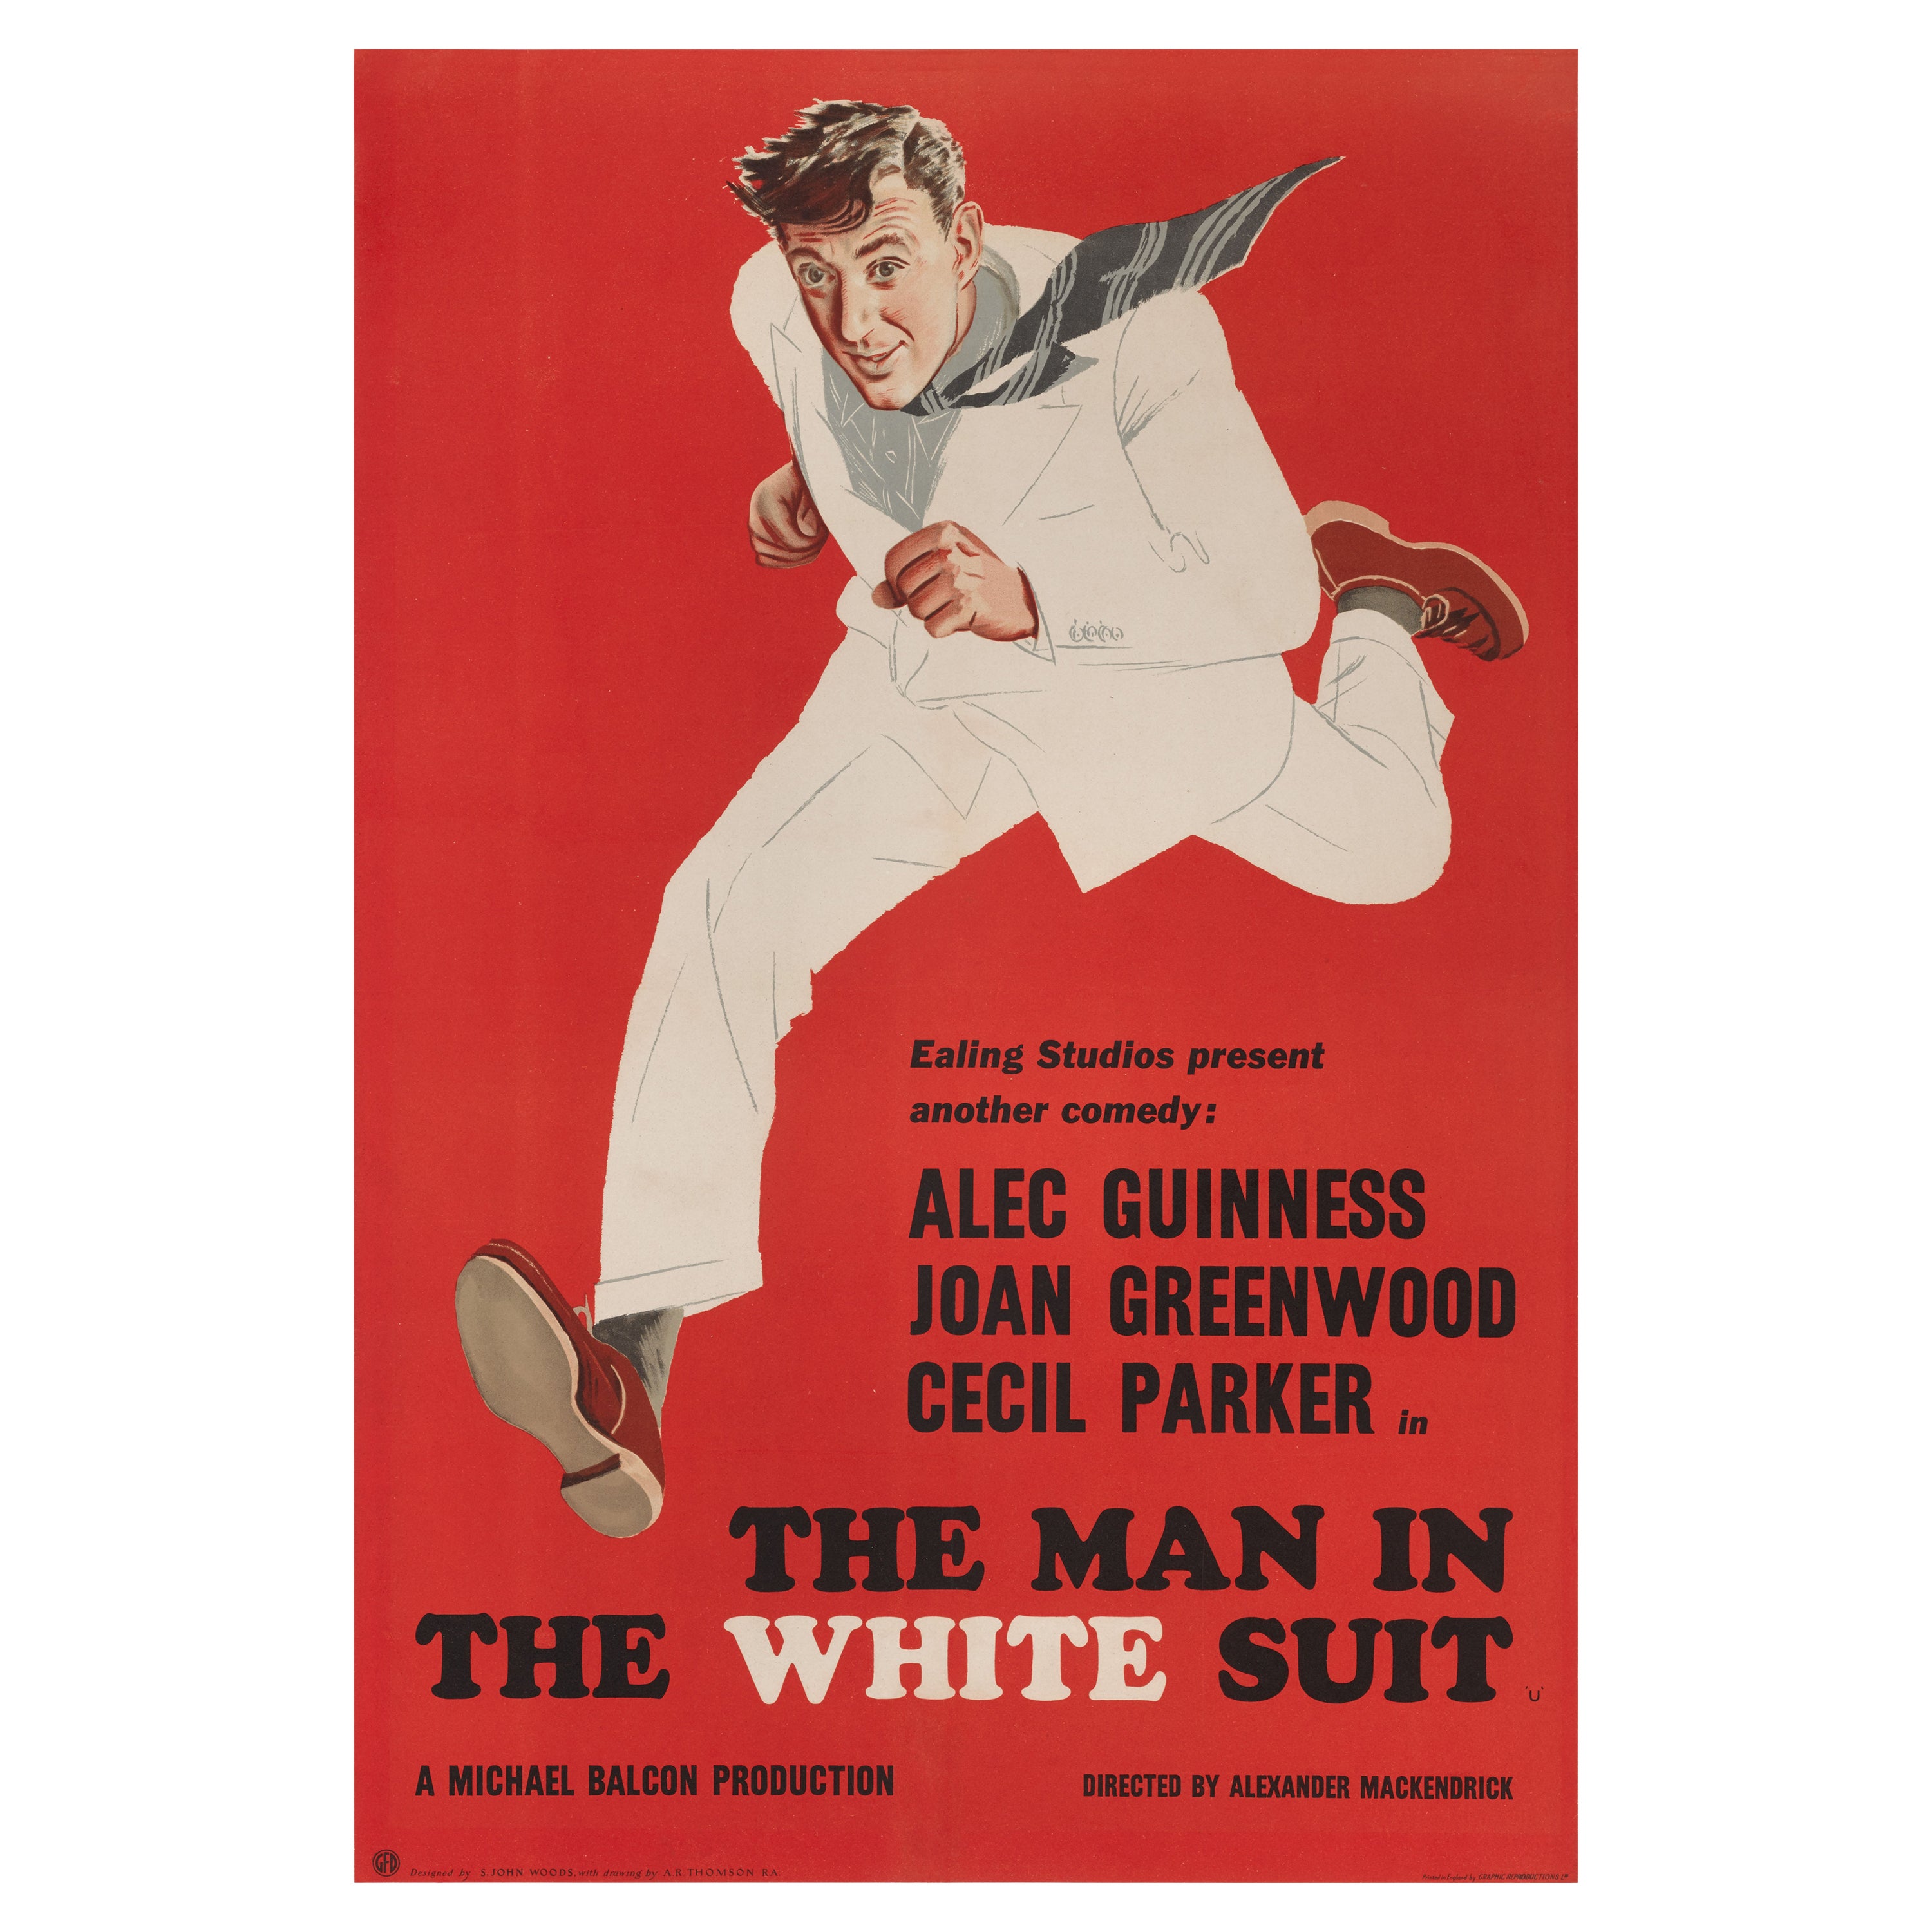 The Man in the White Suit